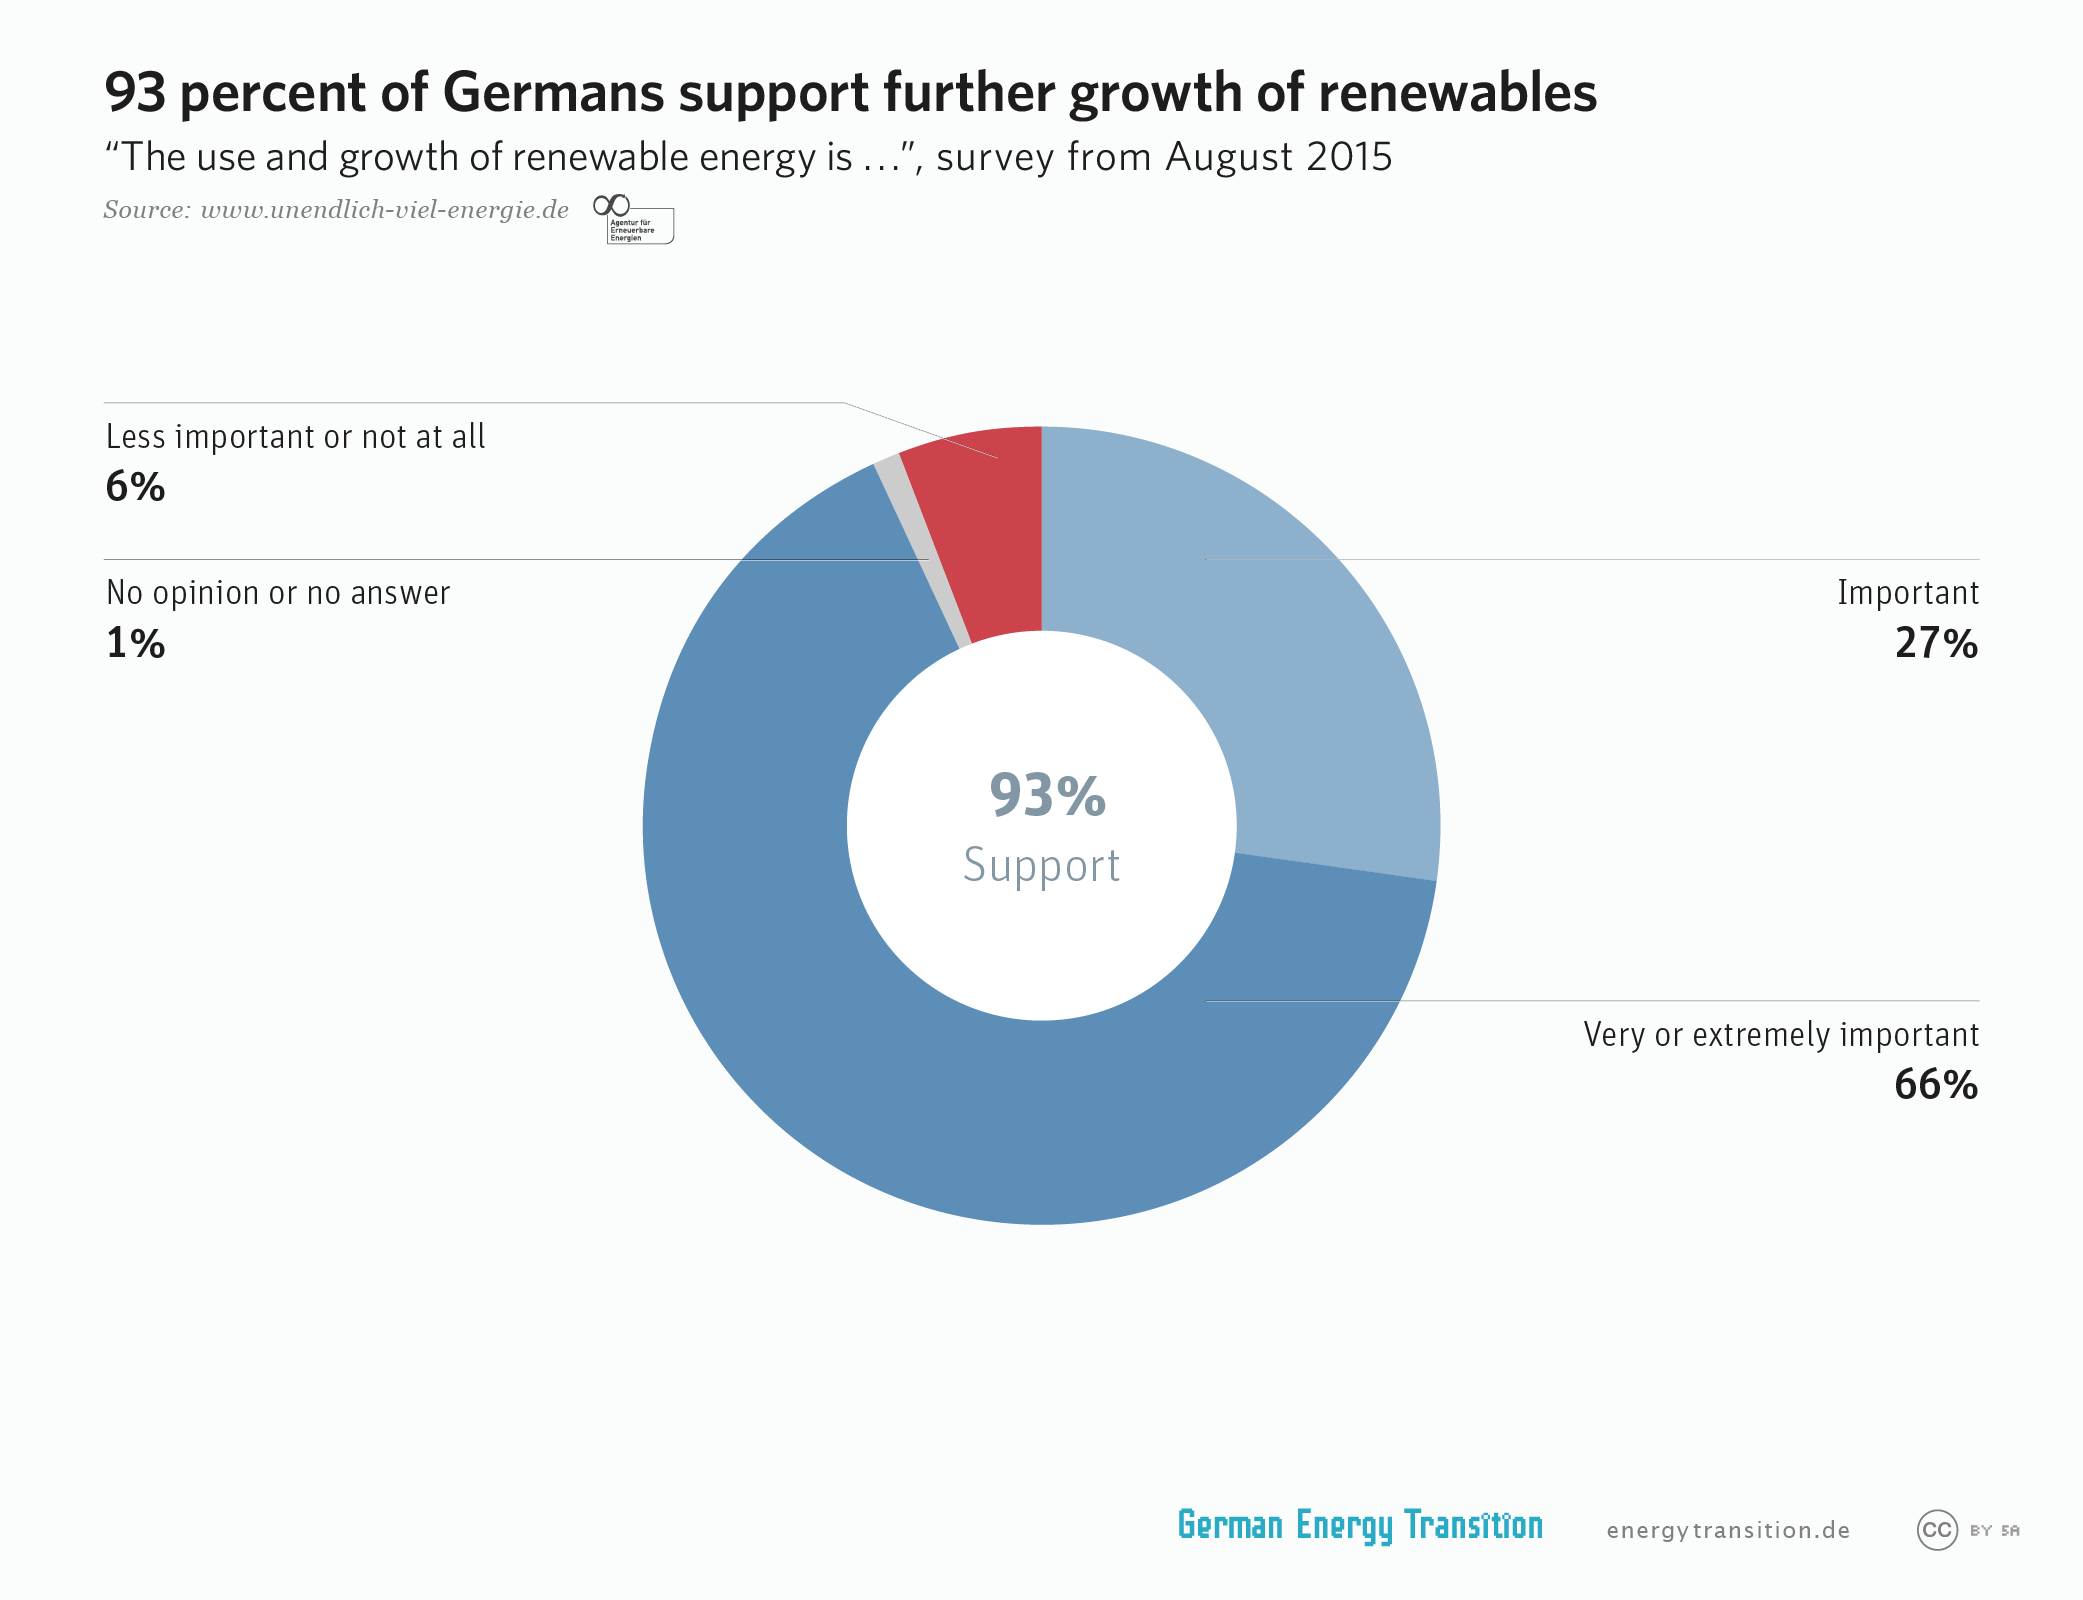 93 percent of Germans support further growth of renewables as of August 2015